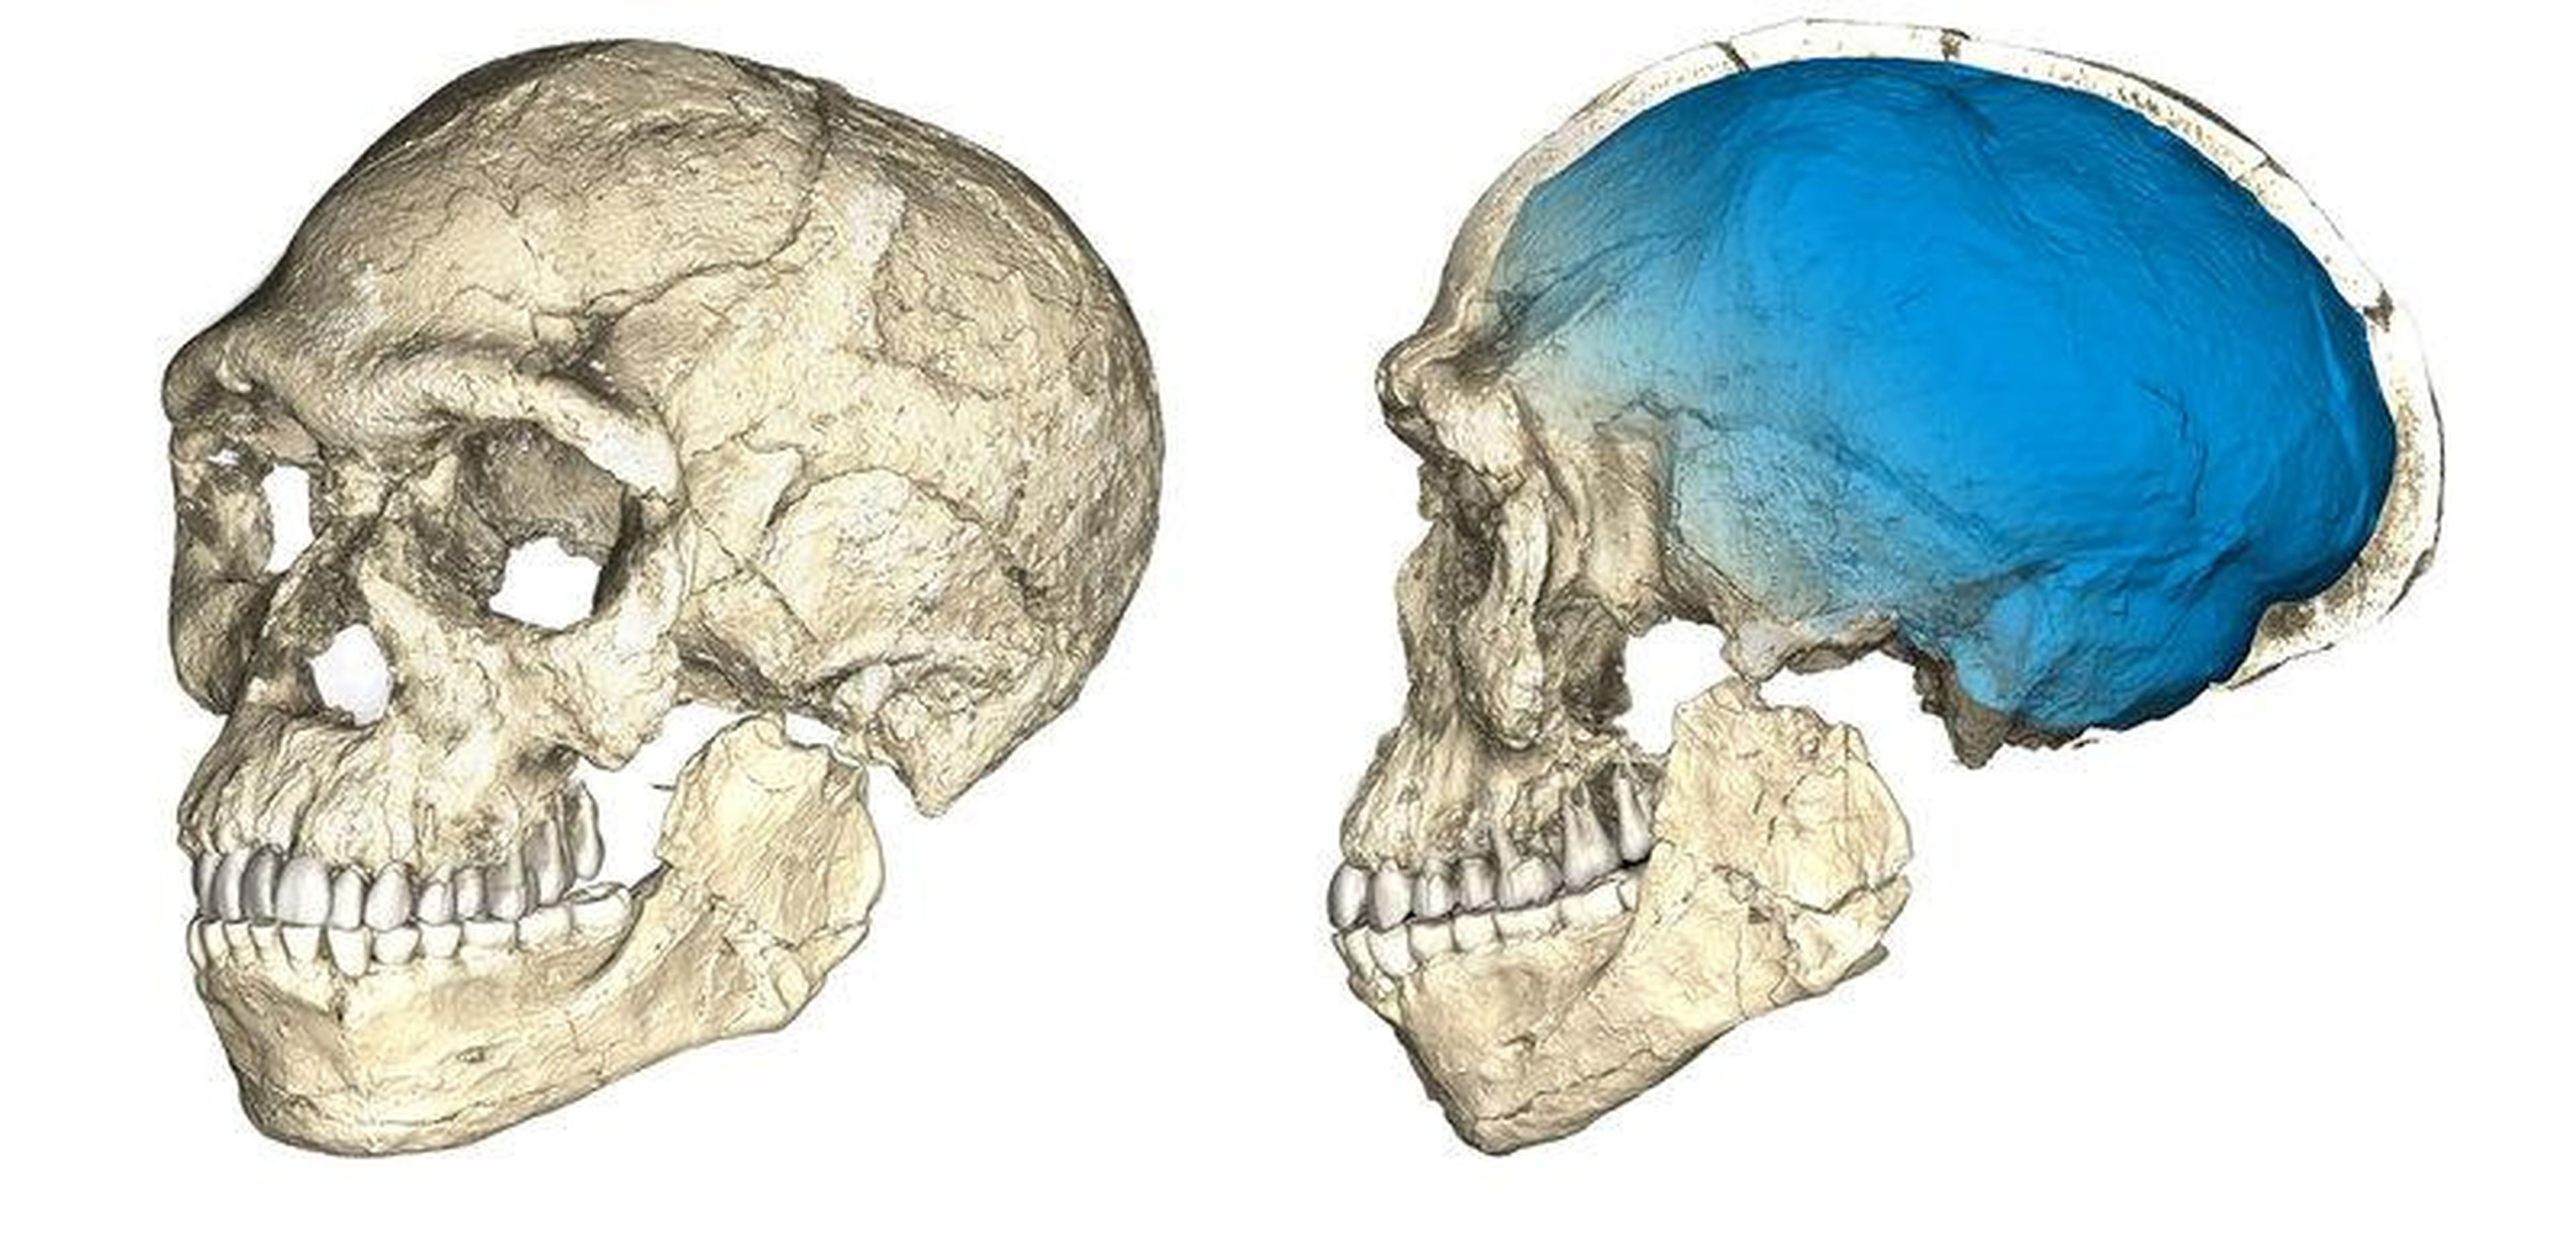 Two views of a composite reconstruction of the earliest known Homo sapiens fossils from Jebel Irhoud in Morocco.